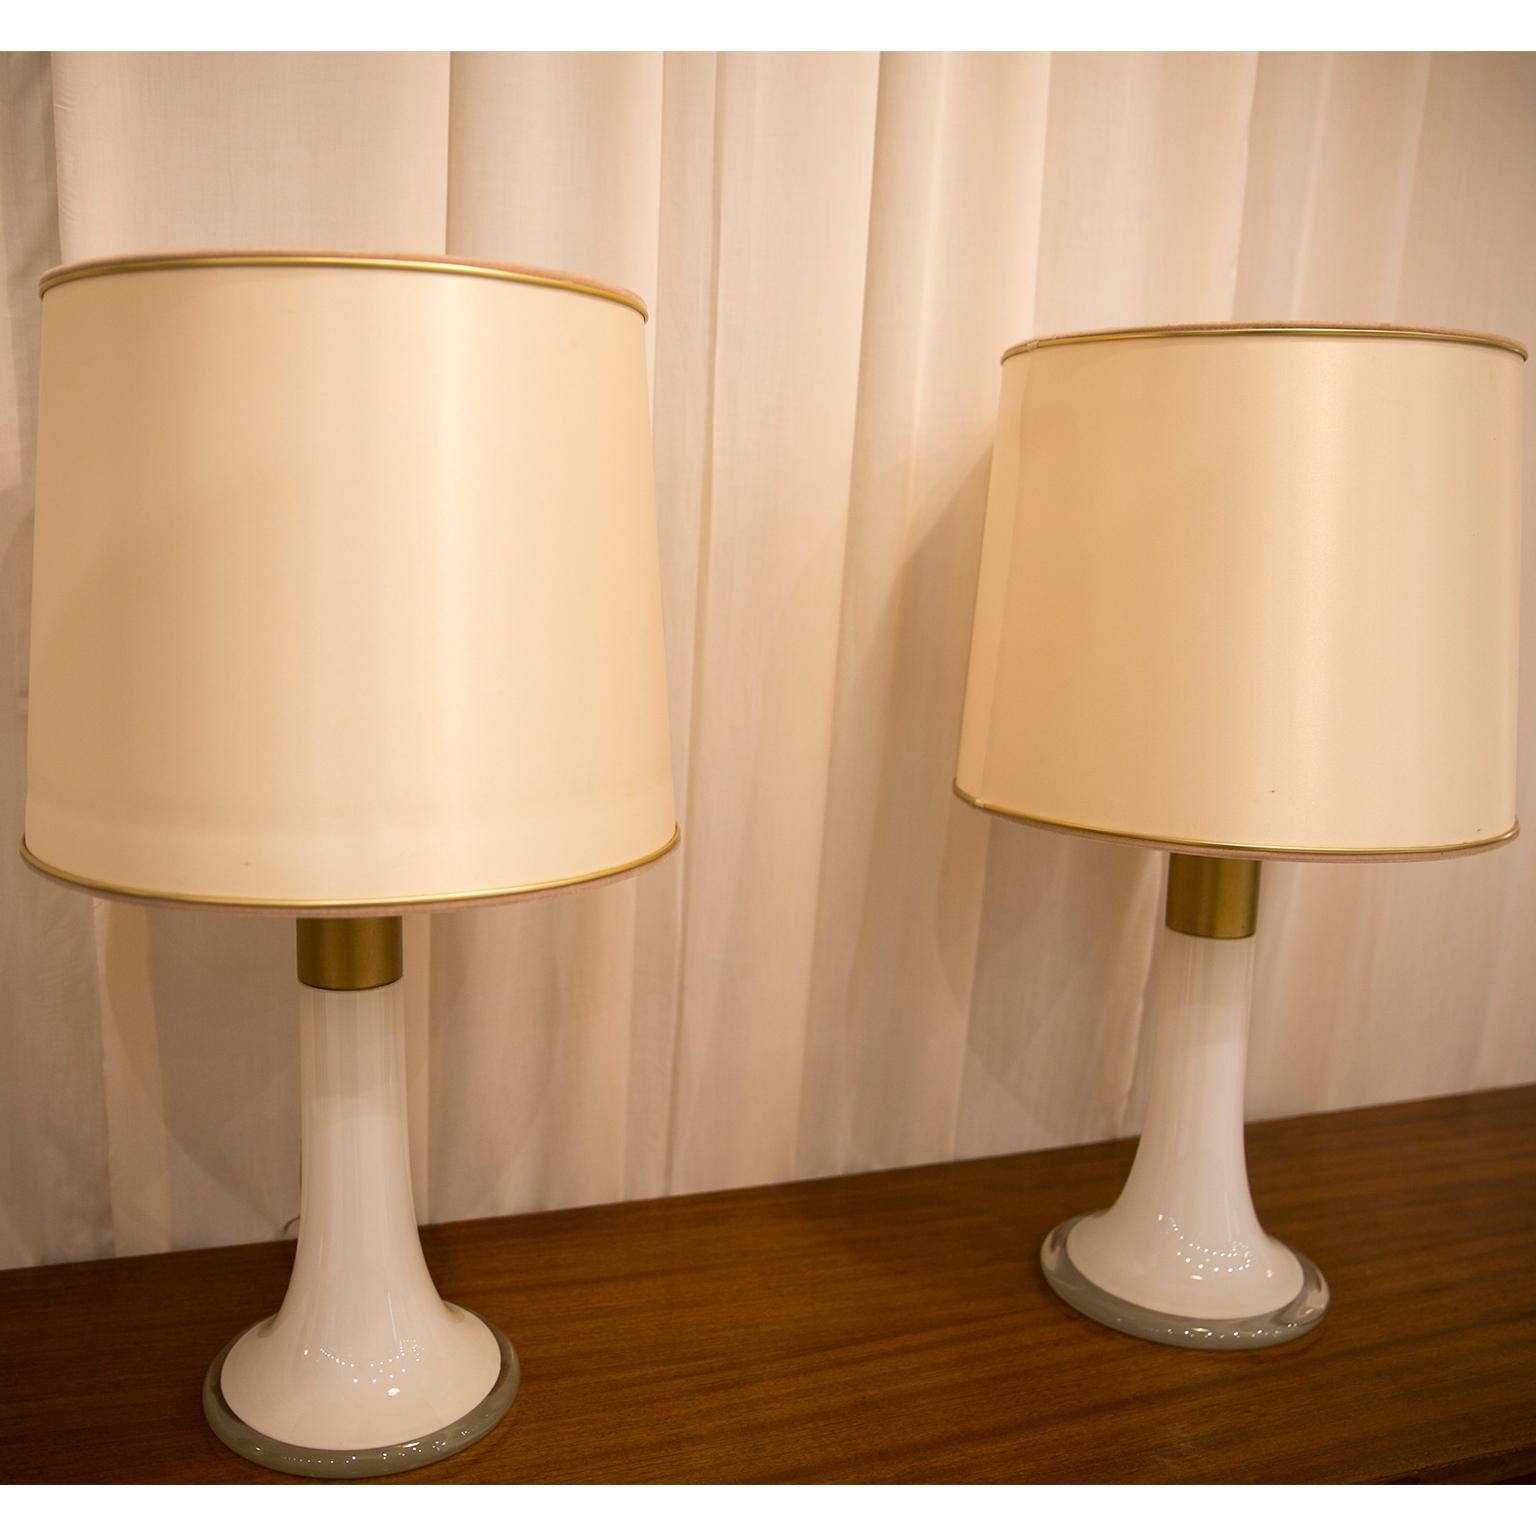 Pair of Table Lamp Model 46-017 by Lisa Johansson Pape for Stockmann Orno, 1950s 12